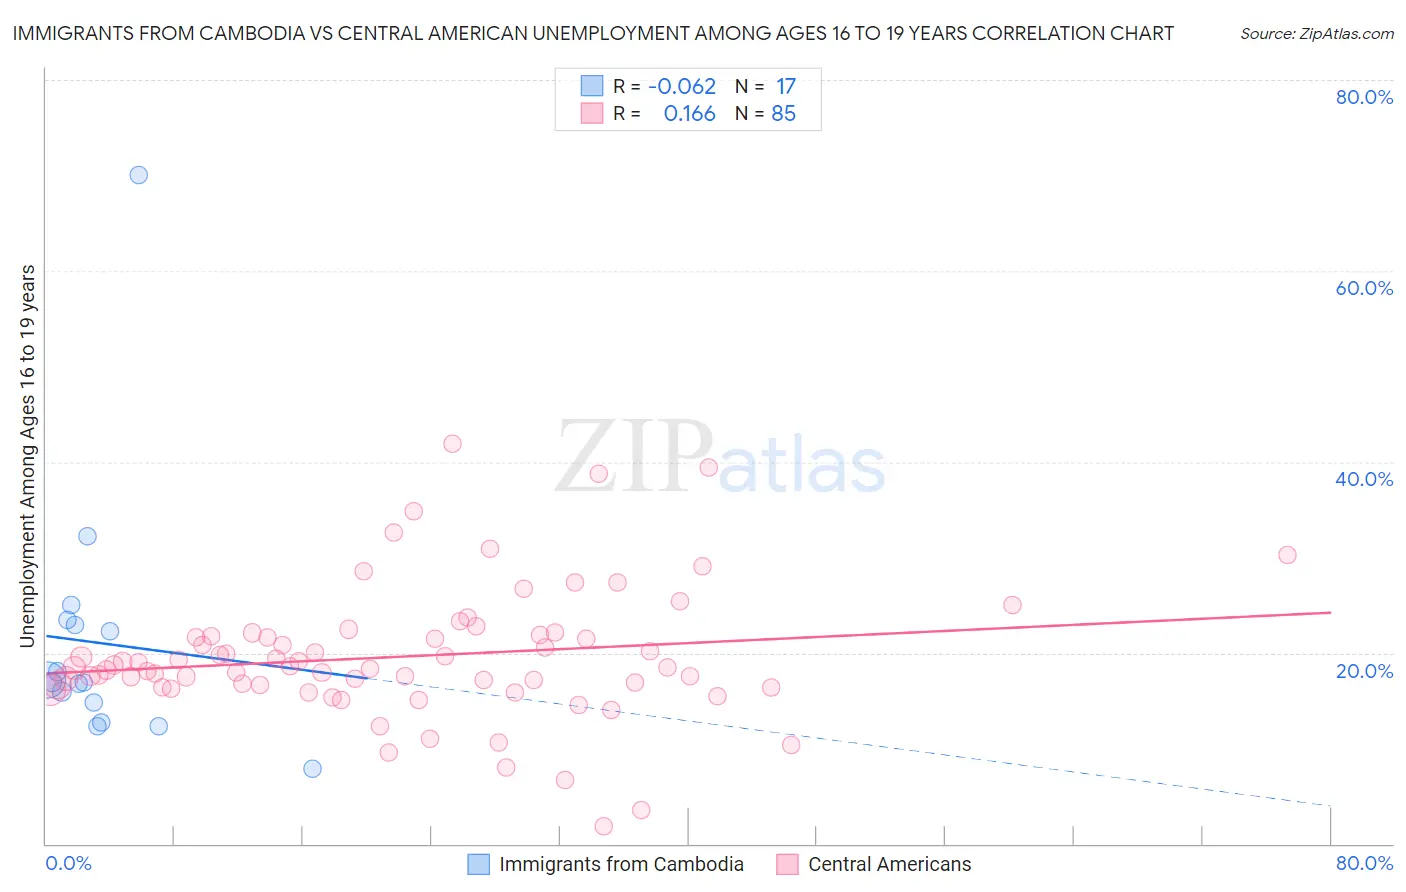 Immigrants from Cambodia vs Central American Unemployment Among Ages 16 to 19 years